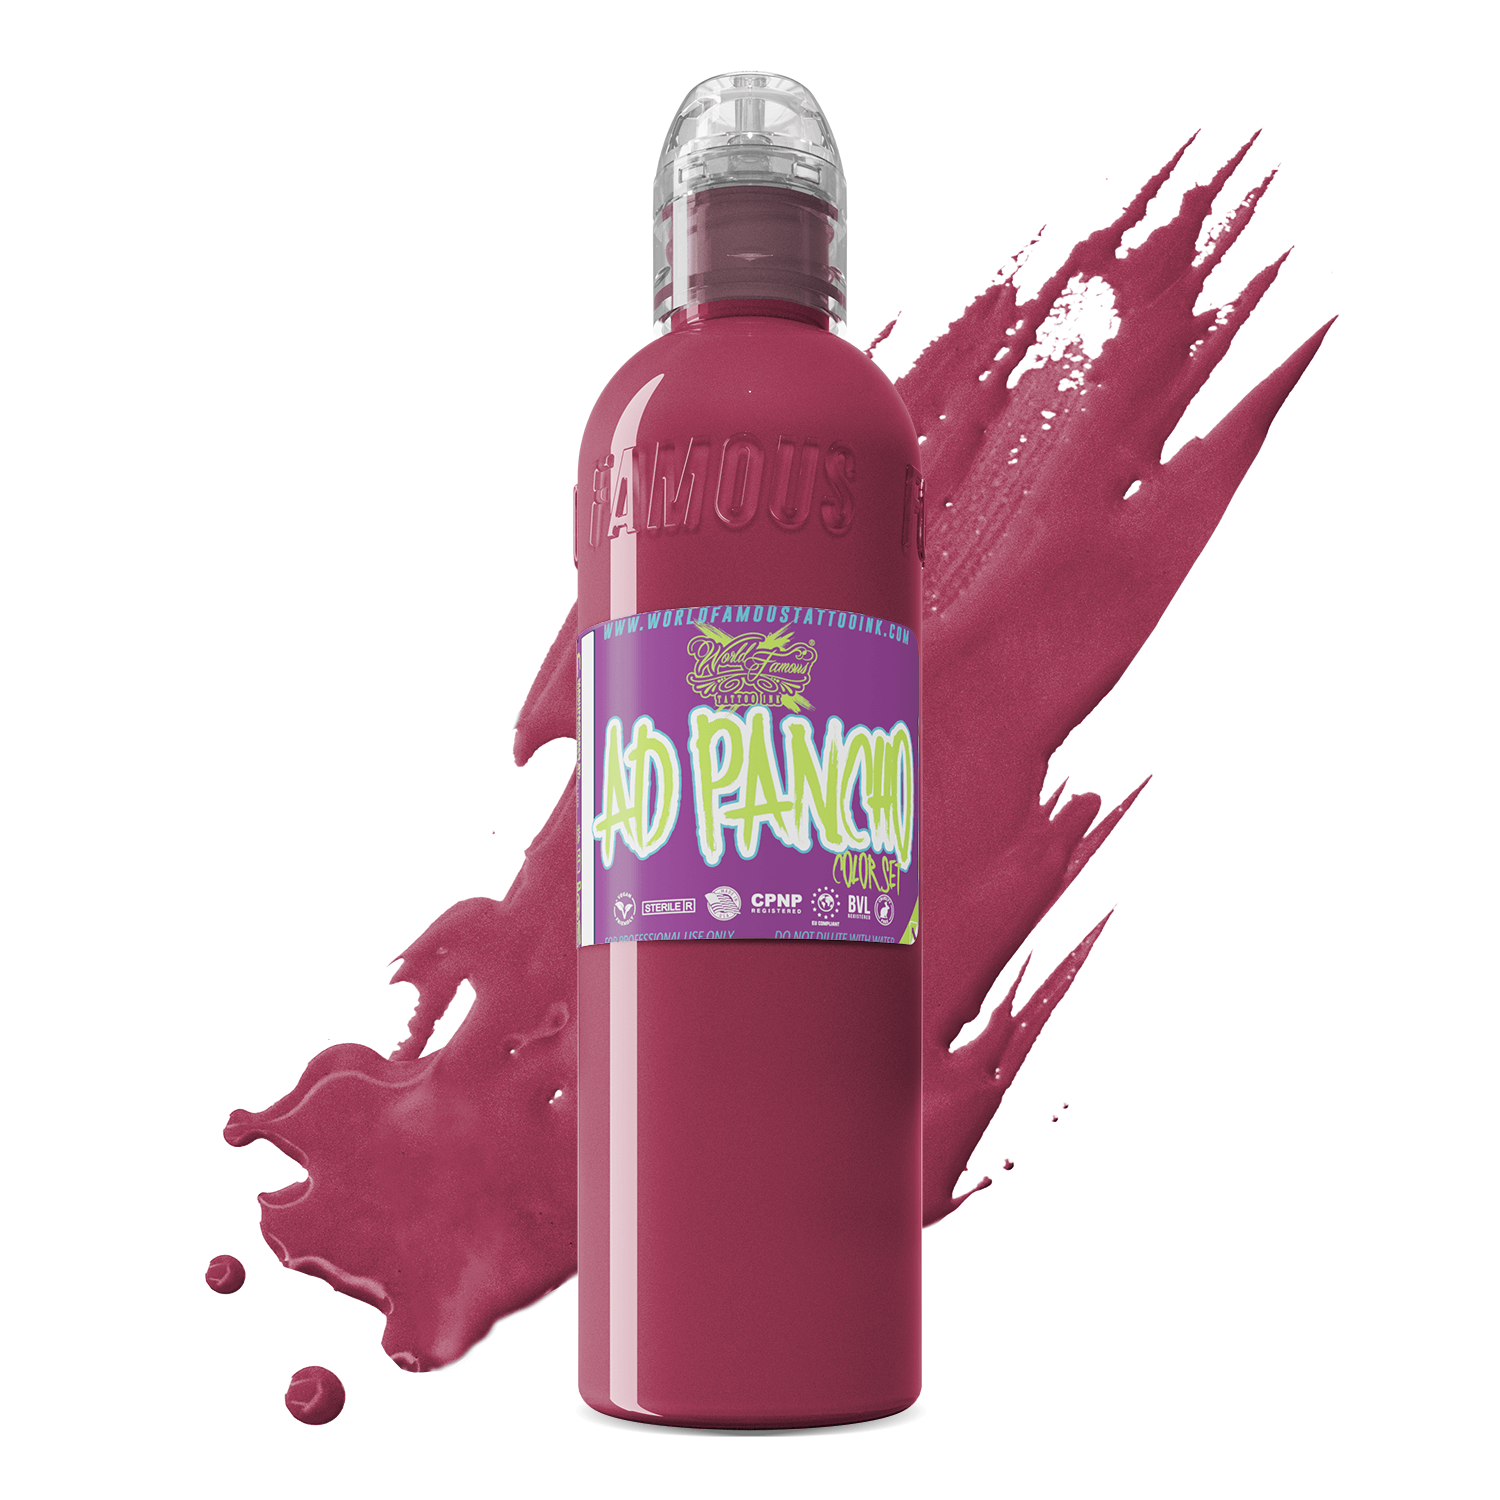 A.D. Pancho Proteam Color - Pink | World Famous Tattoo Ink